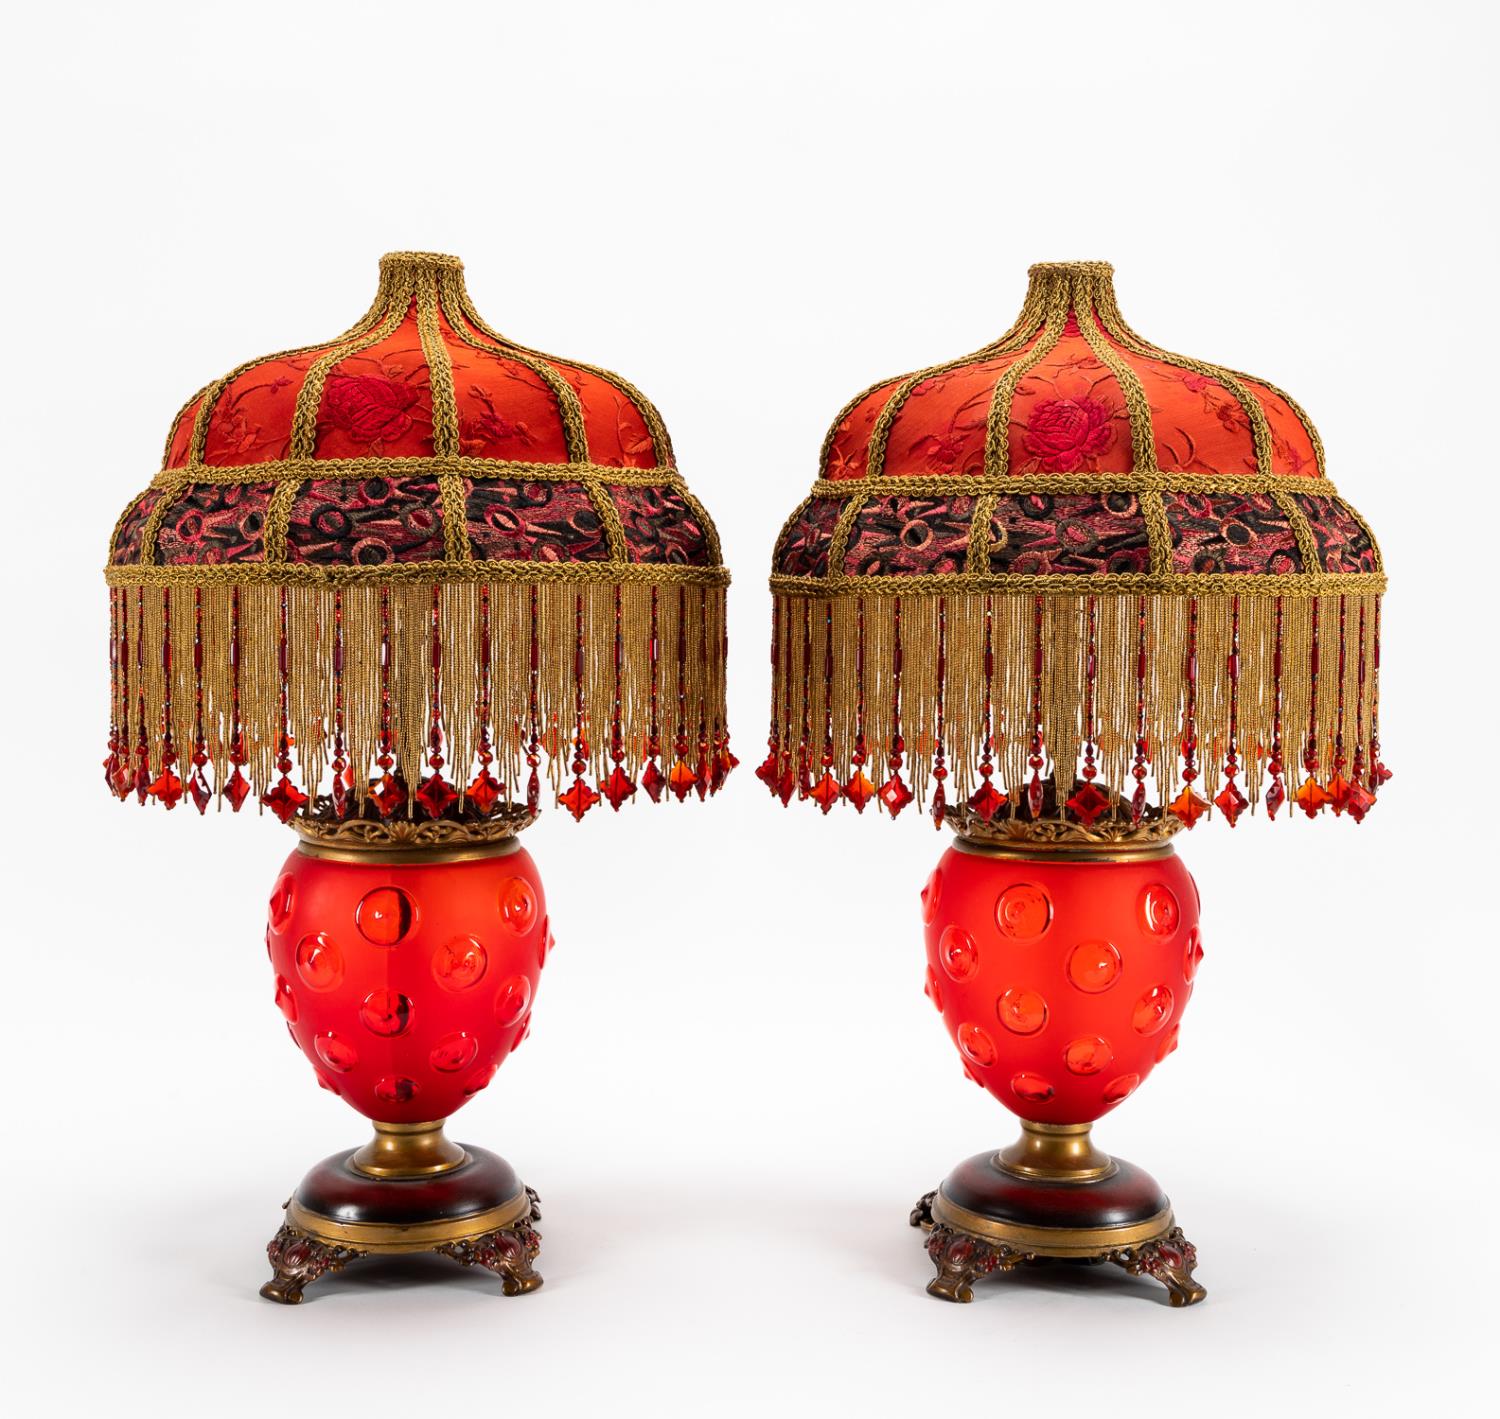 PR KATHLEEN CAID RUBY GLASS LAMPS  359e9d